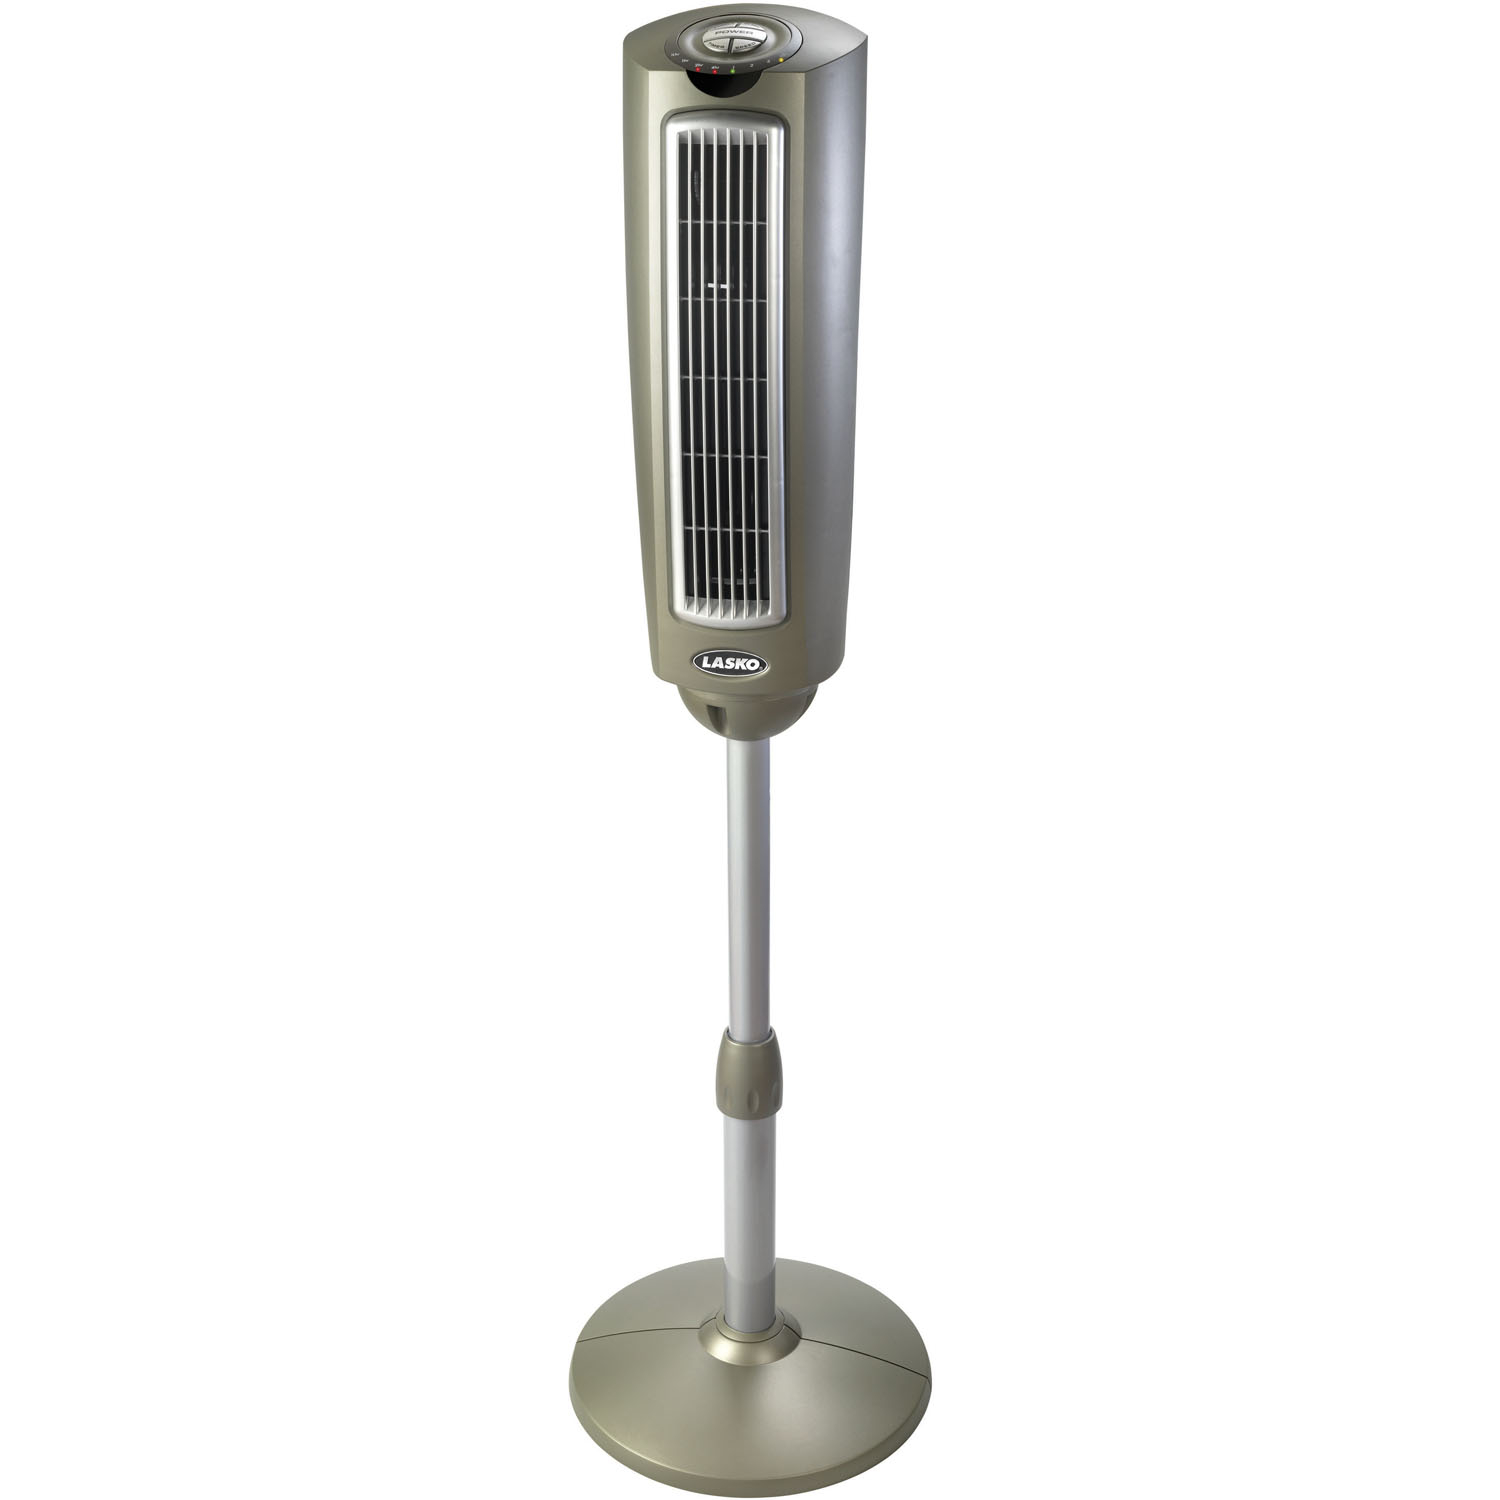 Lasko 52 Space Saving Oscillating Pedestal Tower Fan With Remote Control Walmart intended for proportions 1500 X 1500